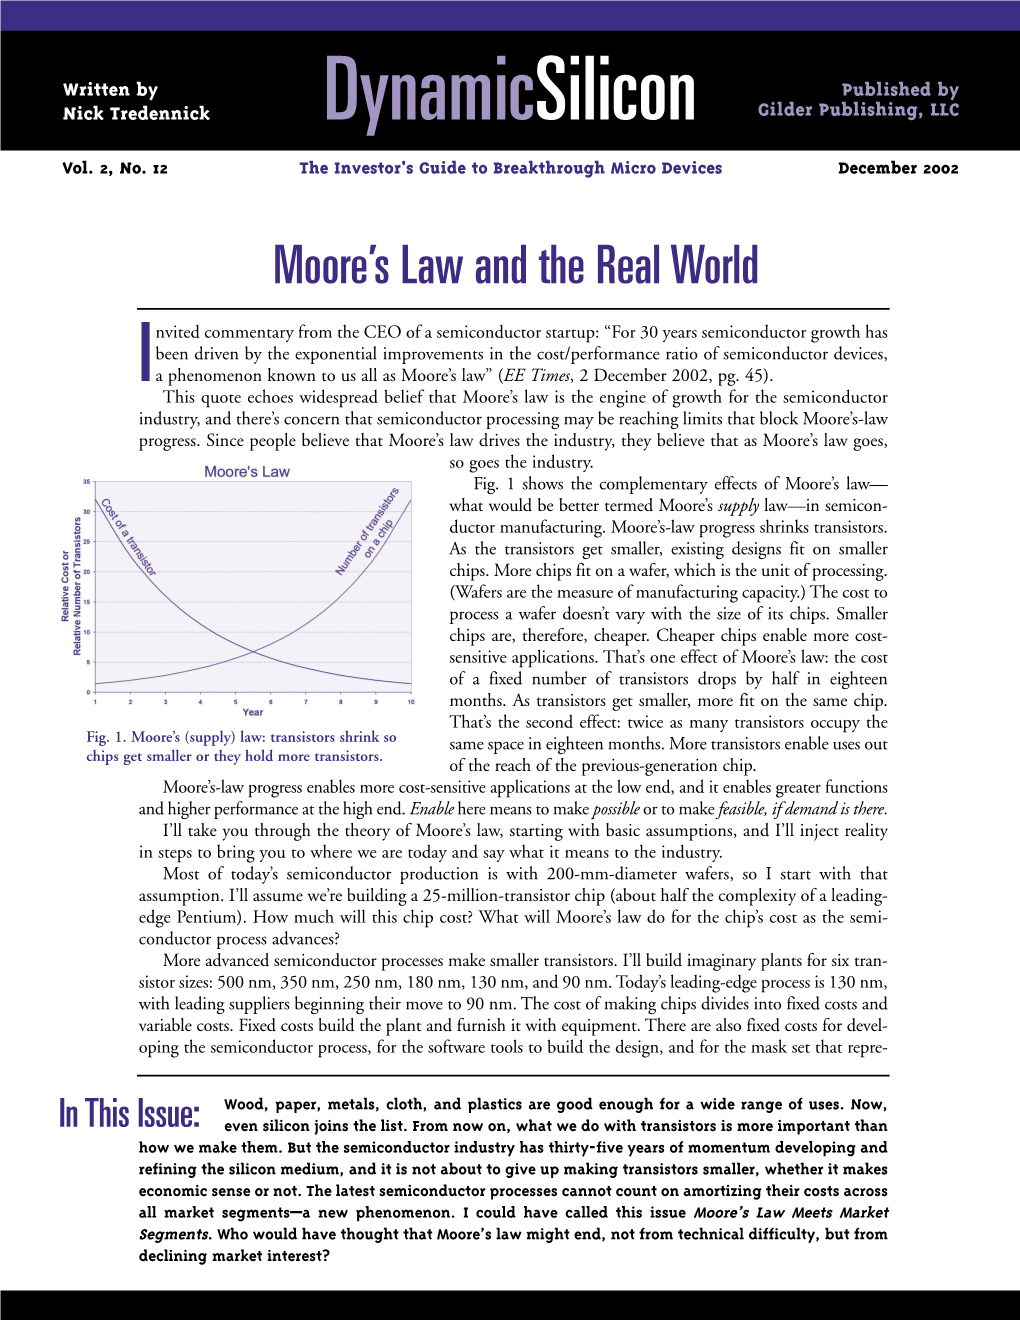 Moore's Law & the Real World